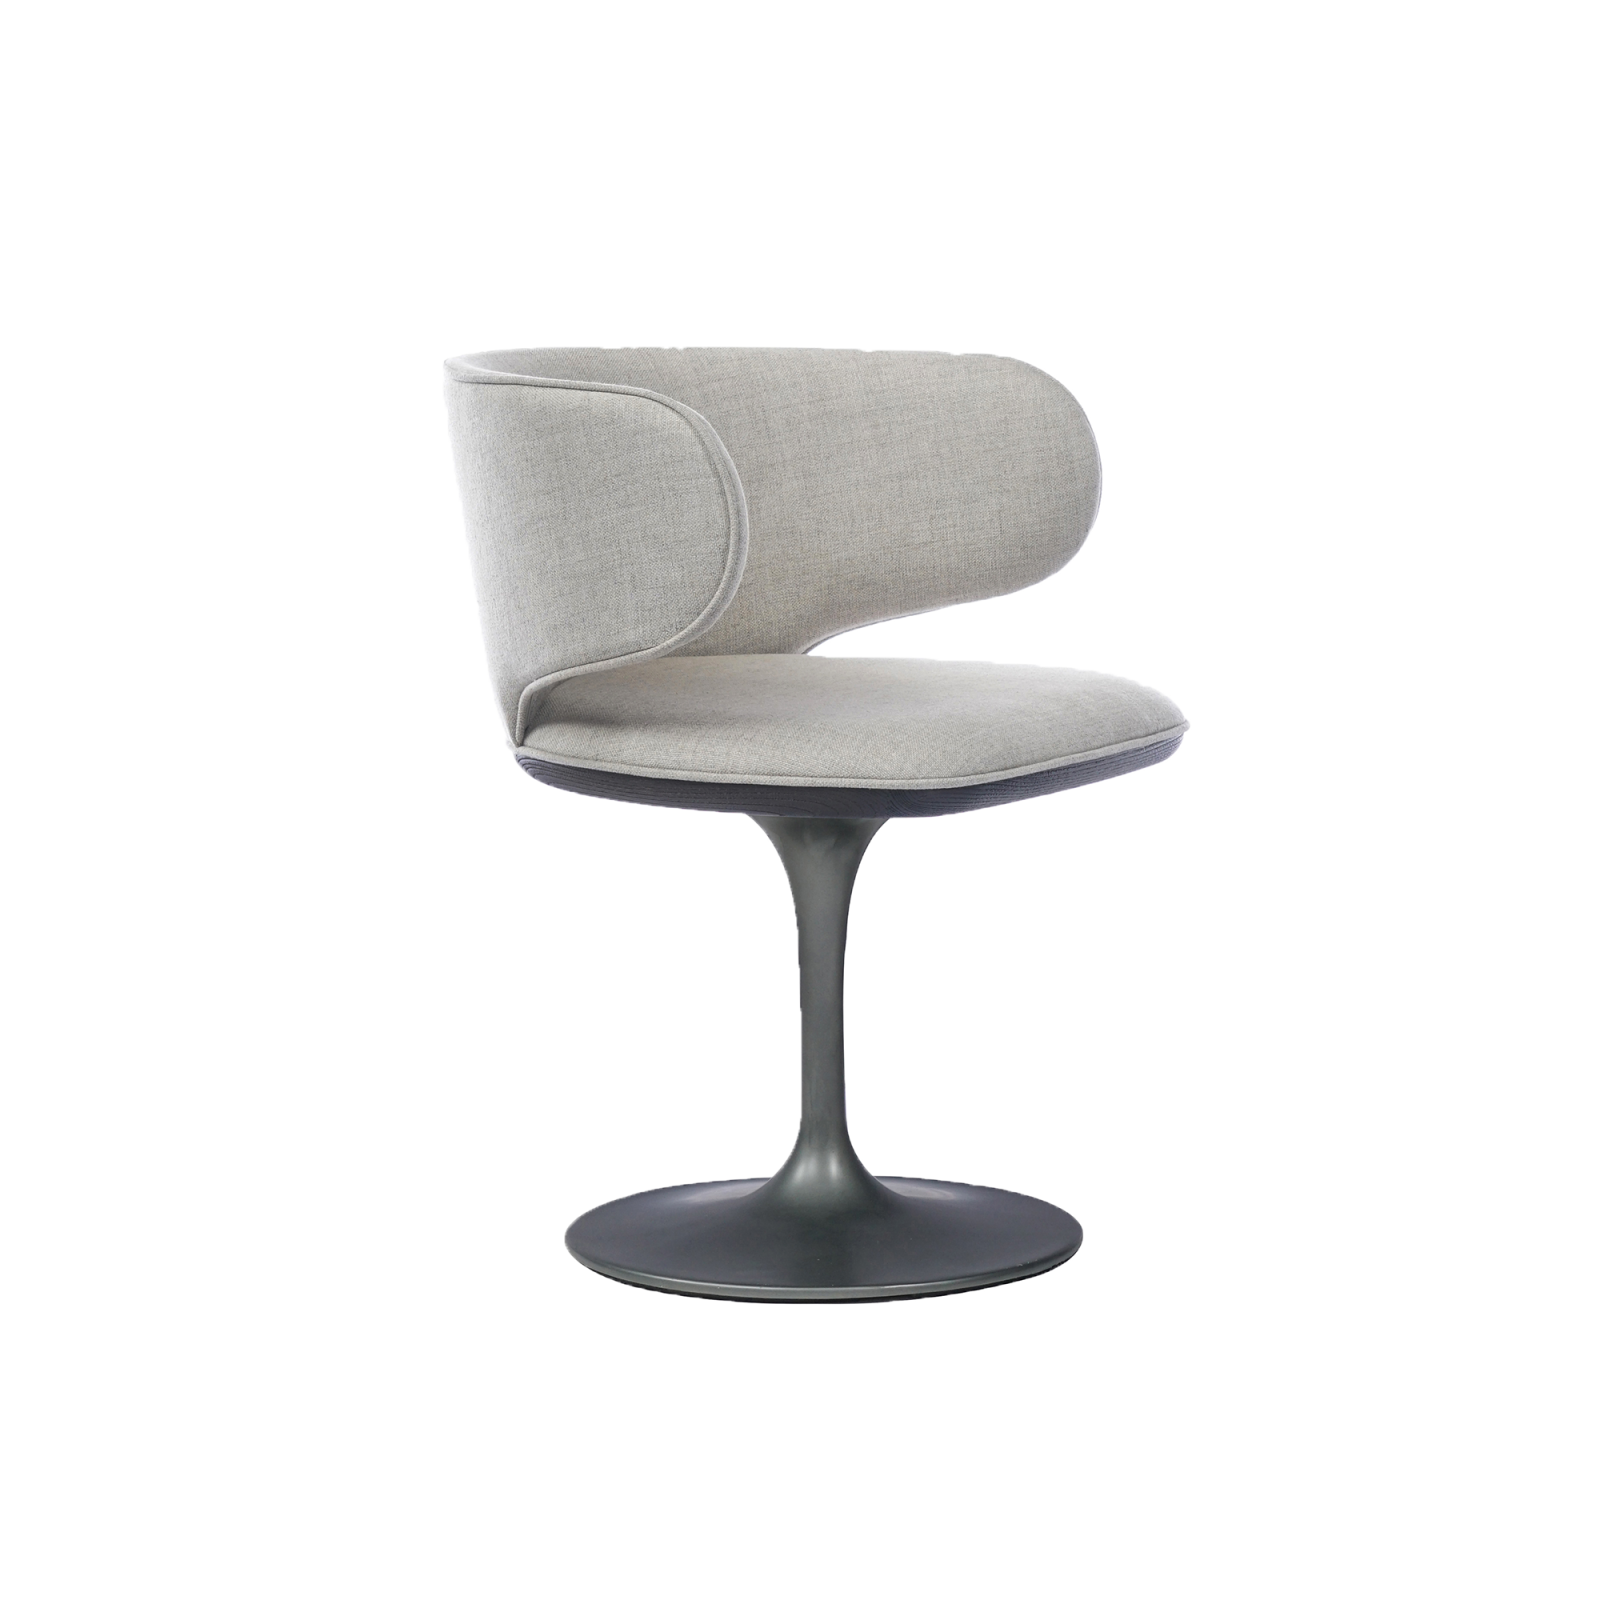 Petra B chair with one leg, oval design in front of a white wall